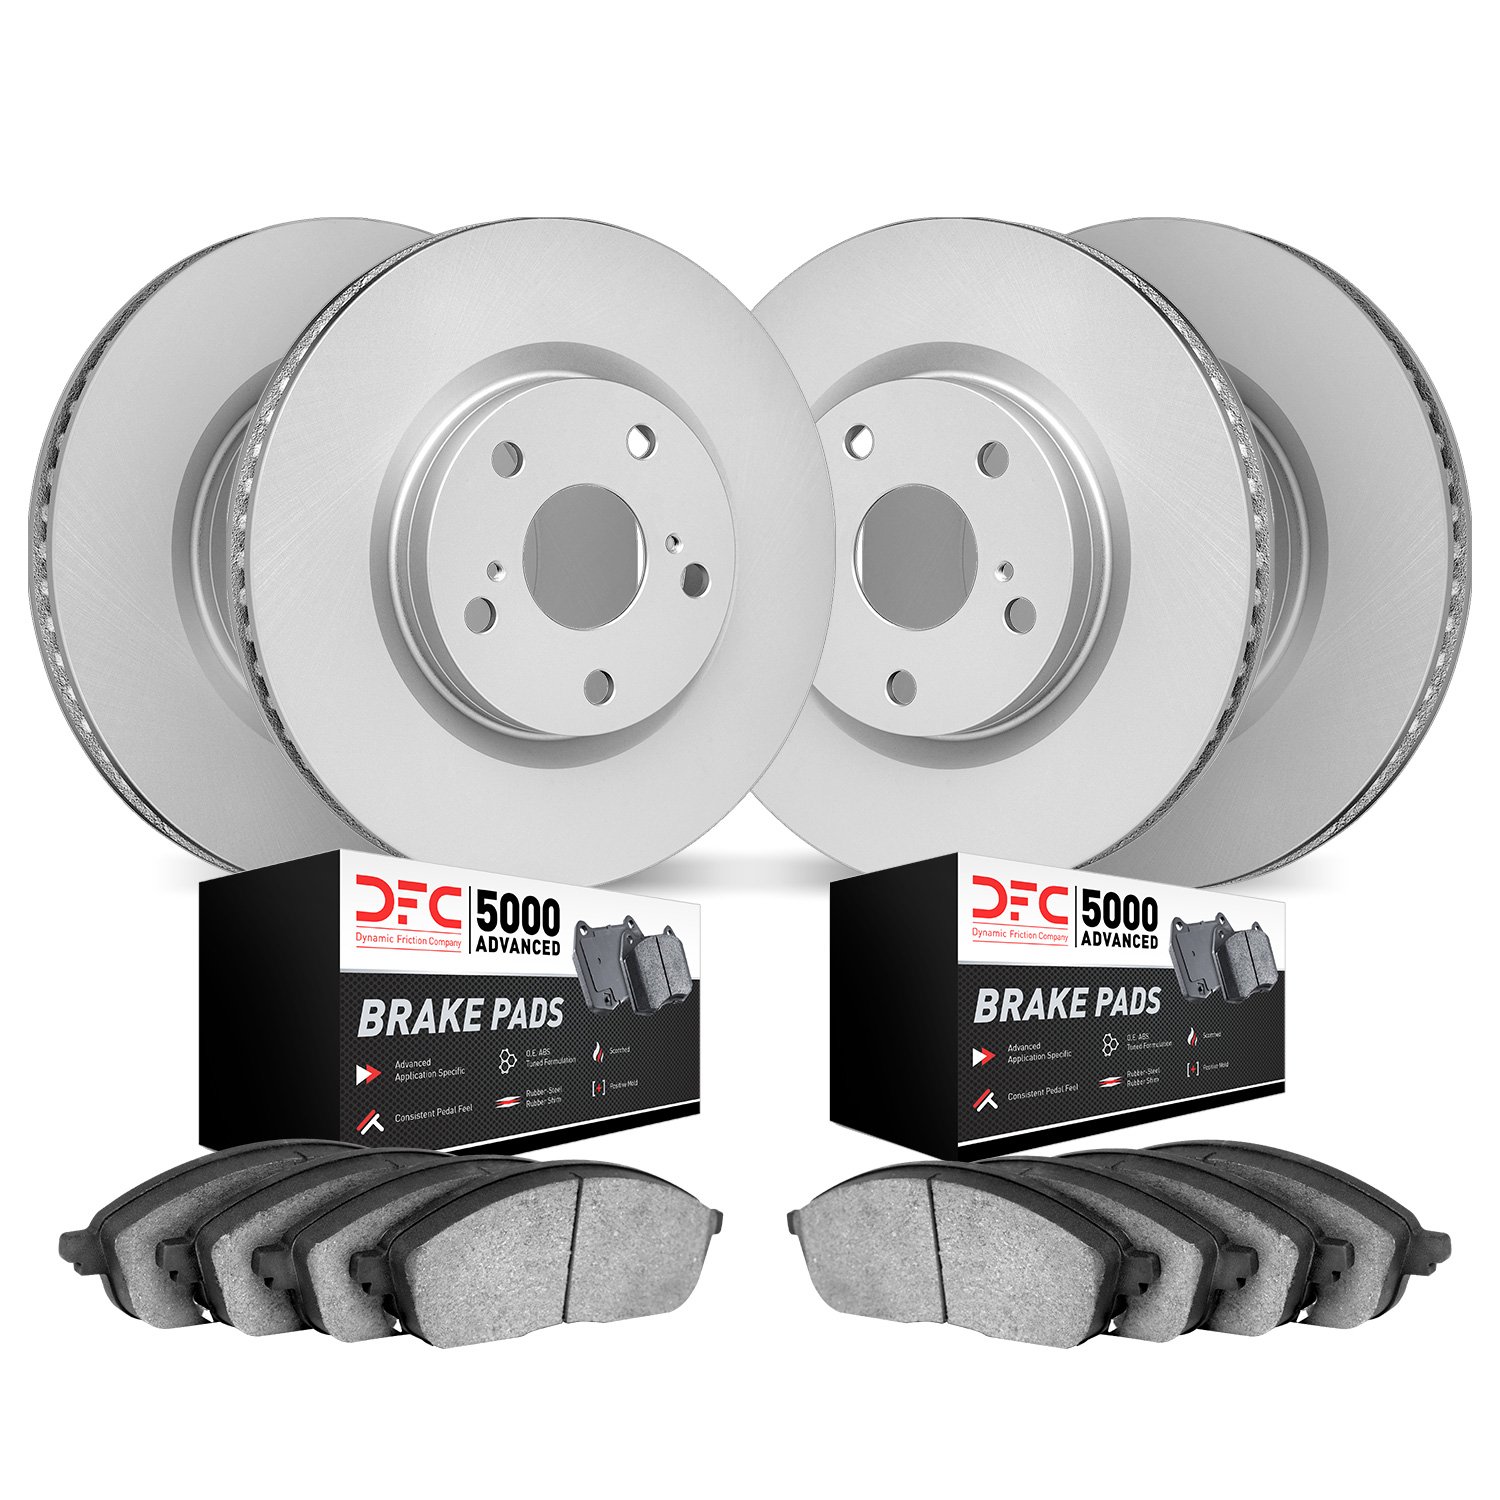 4504-46079 Geospec Brake Rotors w/5000 Advanced Brake Pads Kit, Fits Select GM, Position: Front and Rear